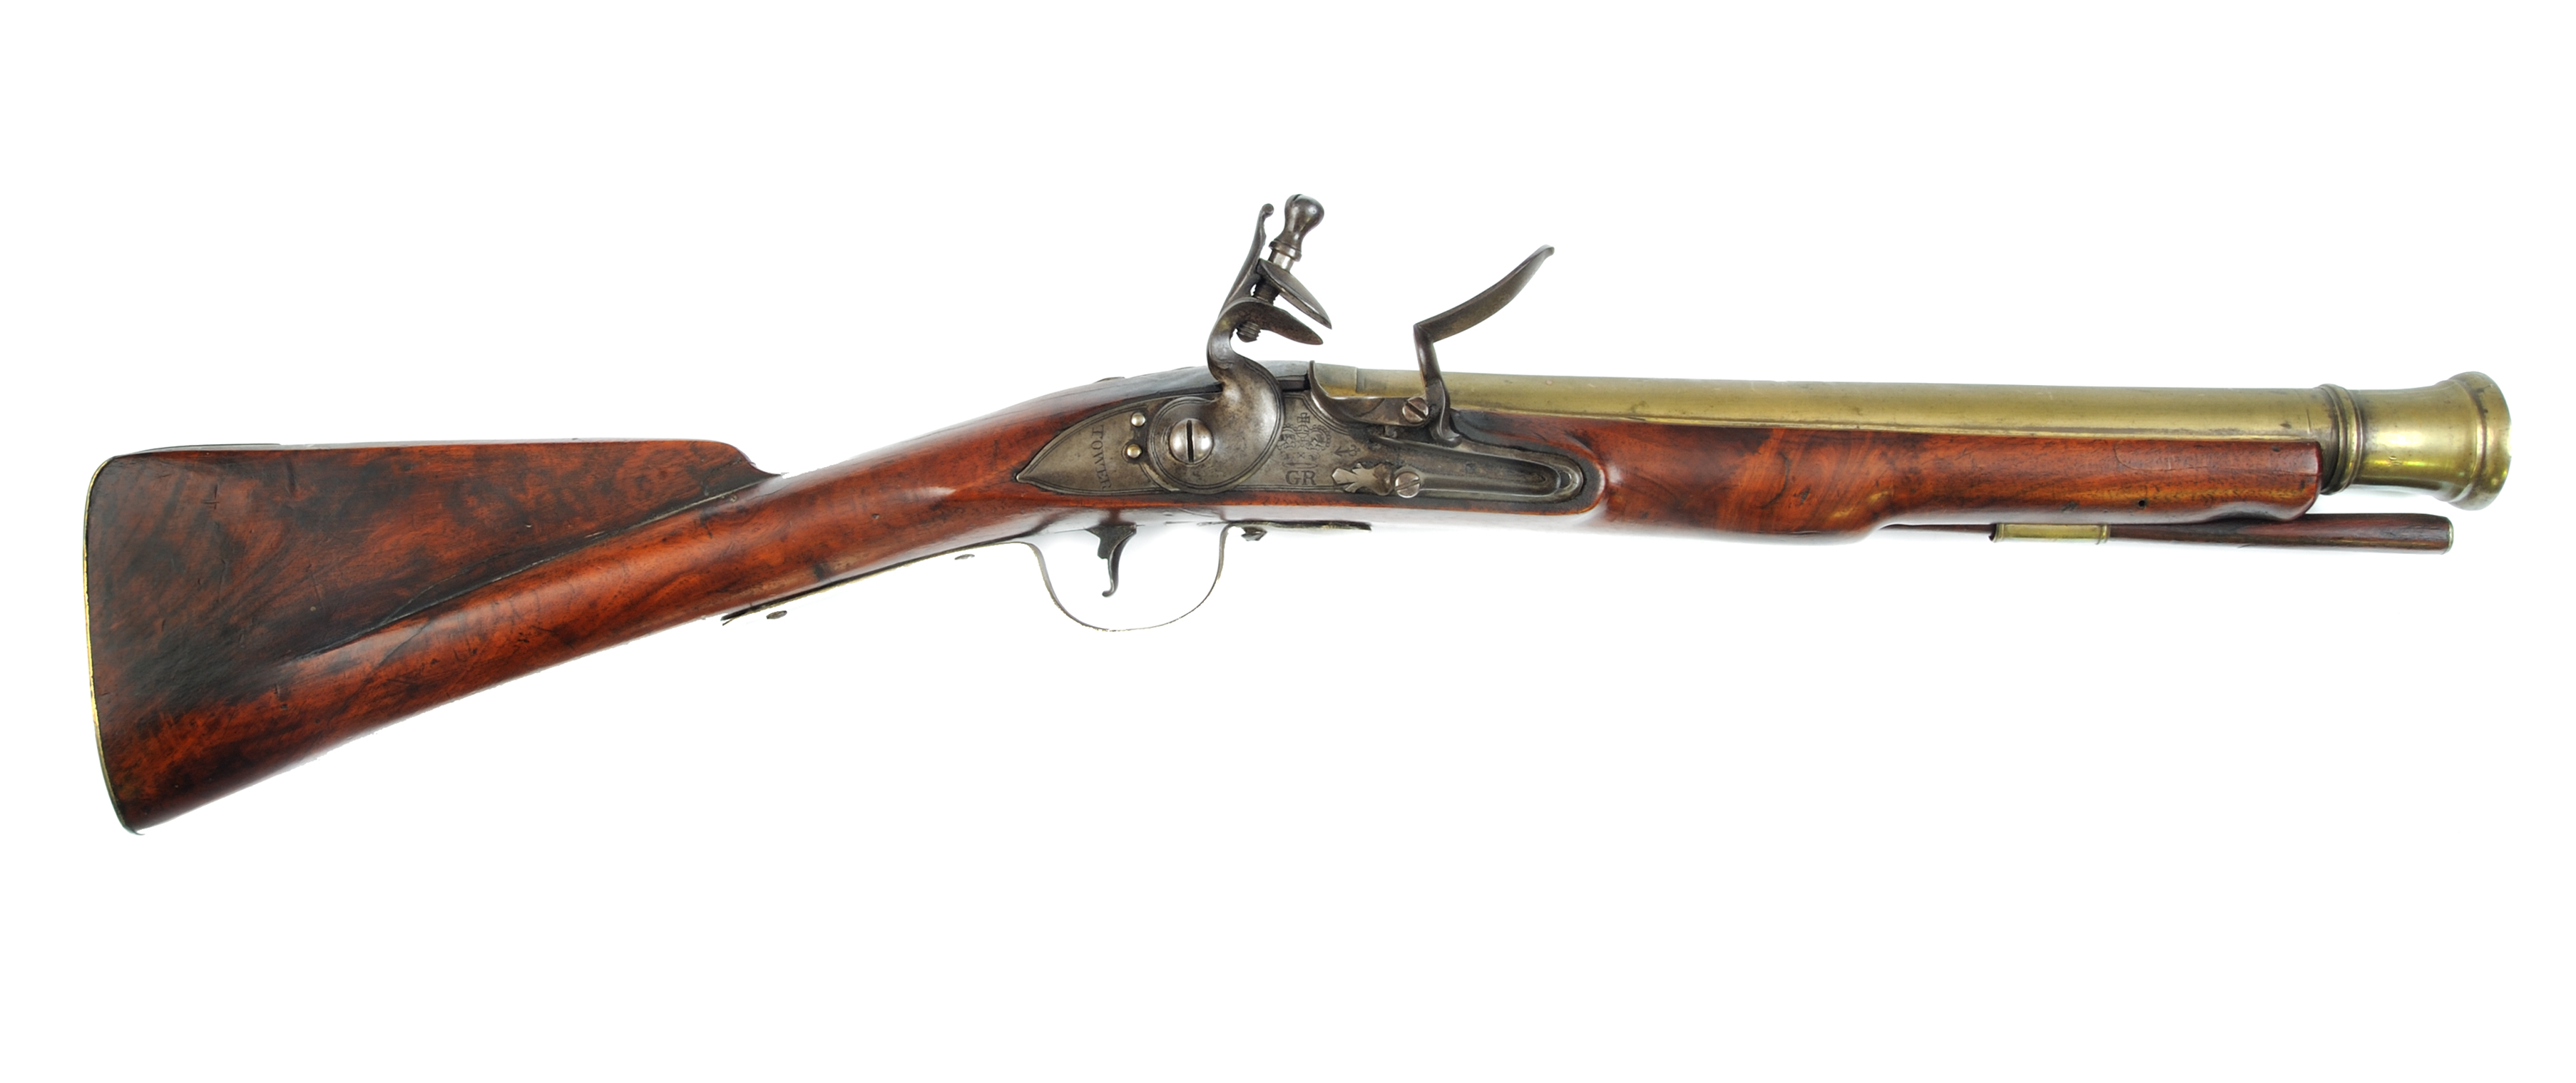 Weapons from the Revolutionary War (With Photos)